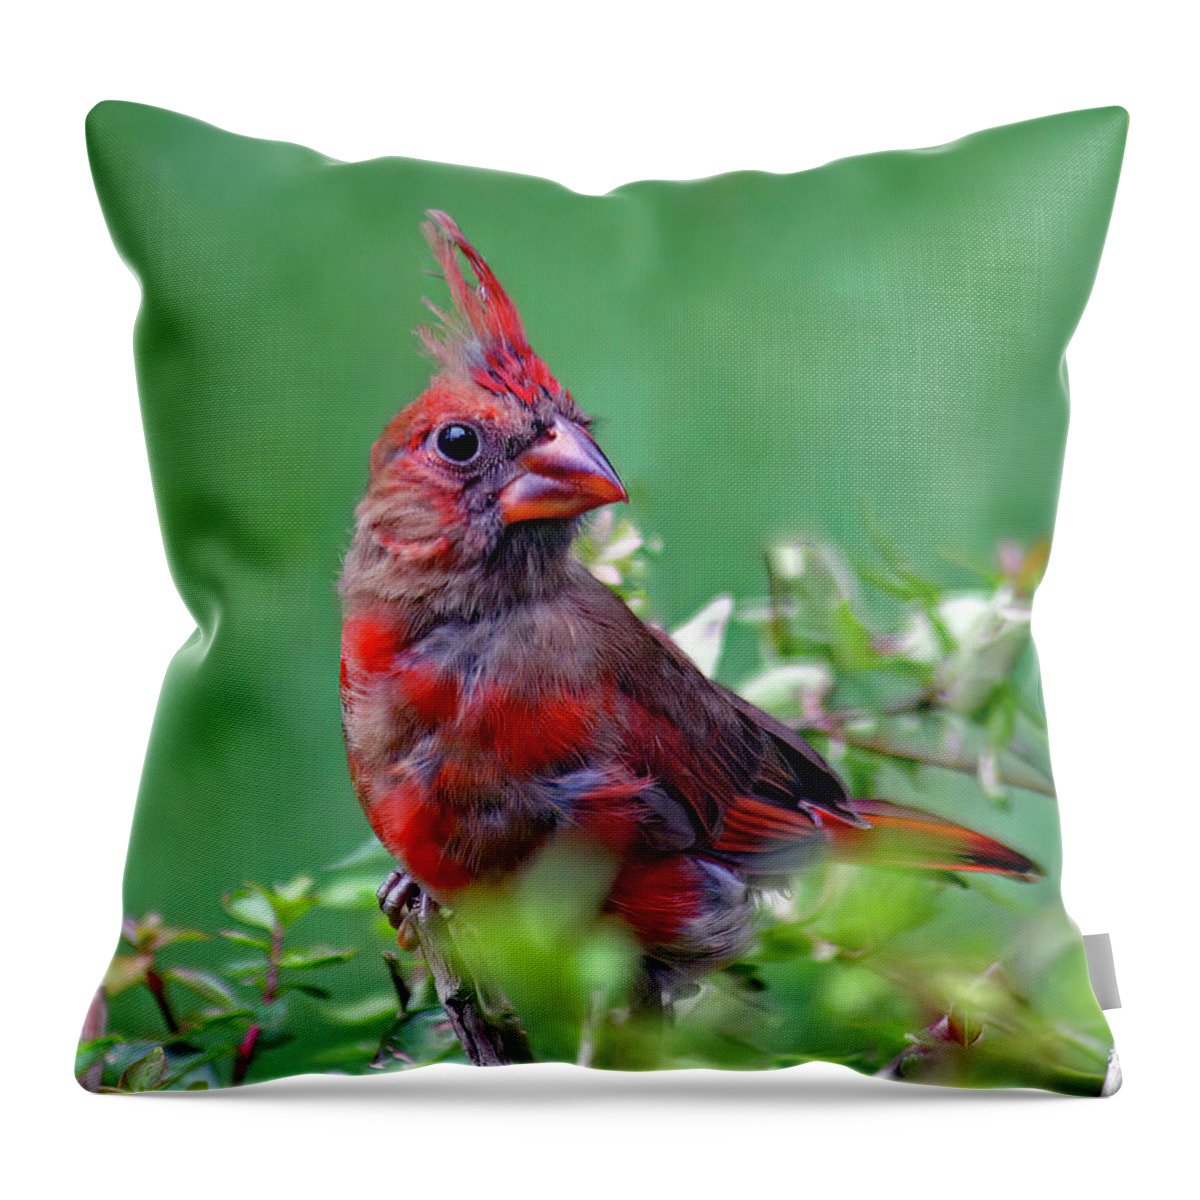 Nature Throw Pillow featuring the photograph Emerging by Gina Fitzhugh